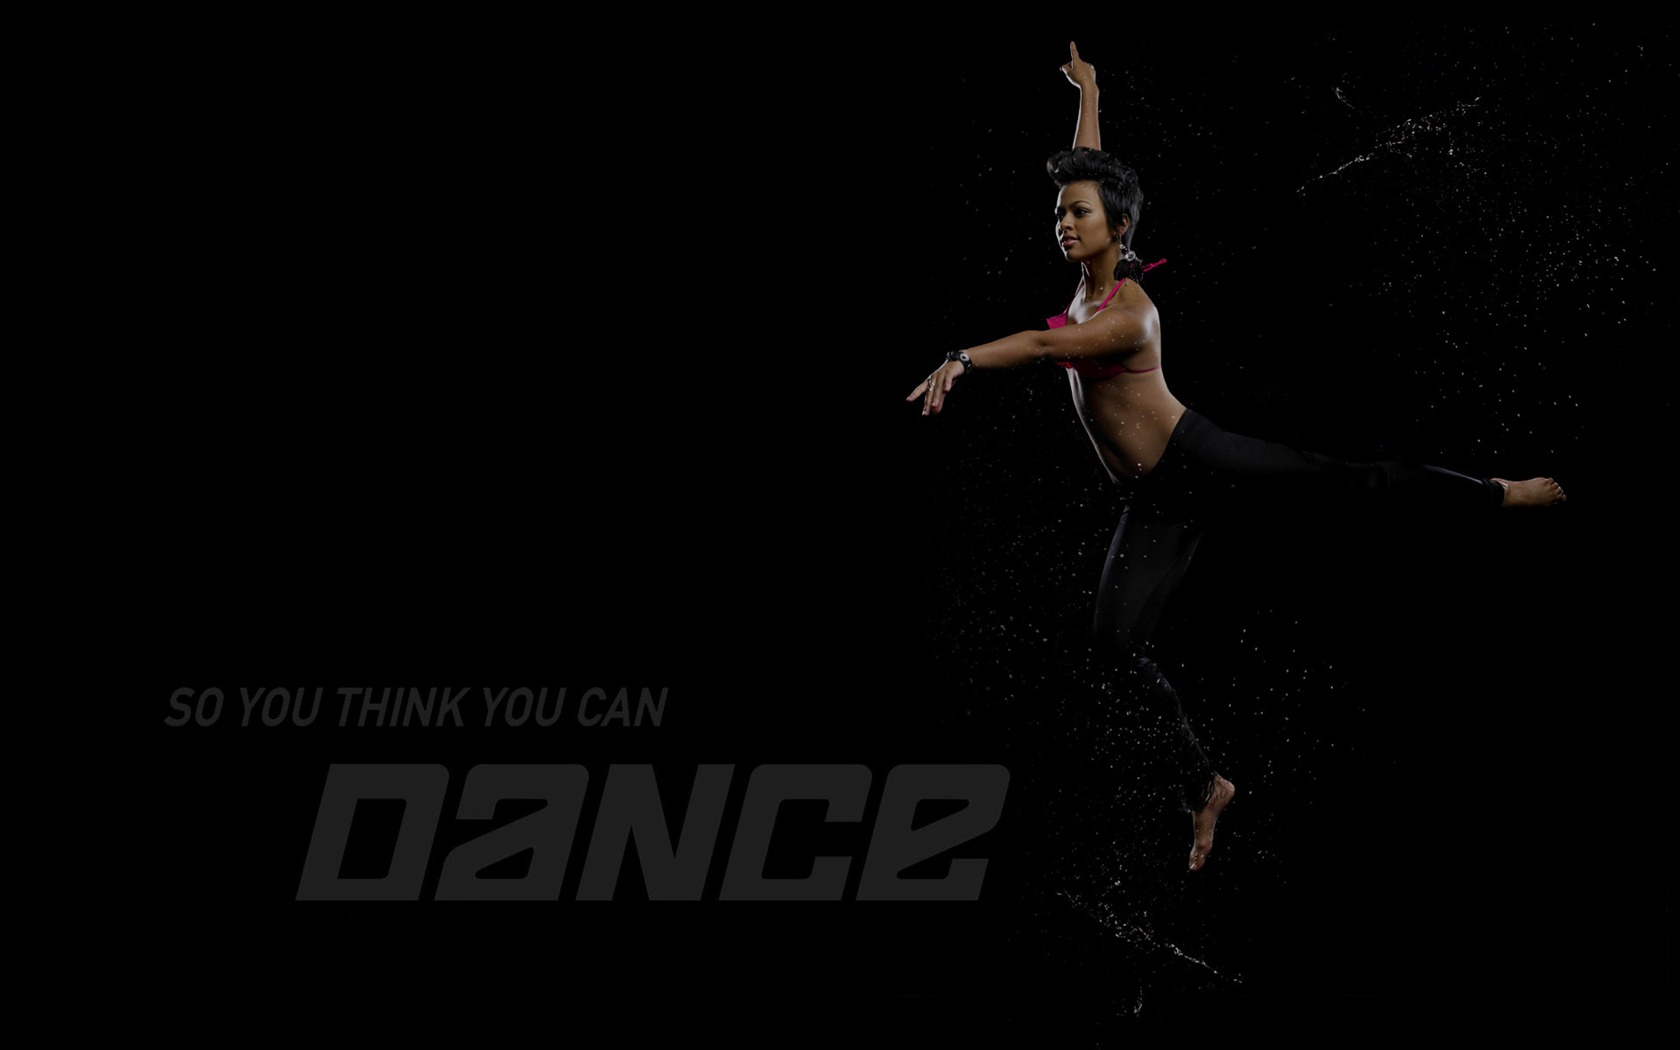 So You Think You Can Dance wallpaper (2) #9 - 1680x1050